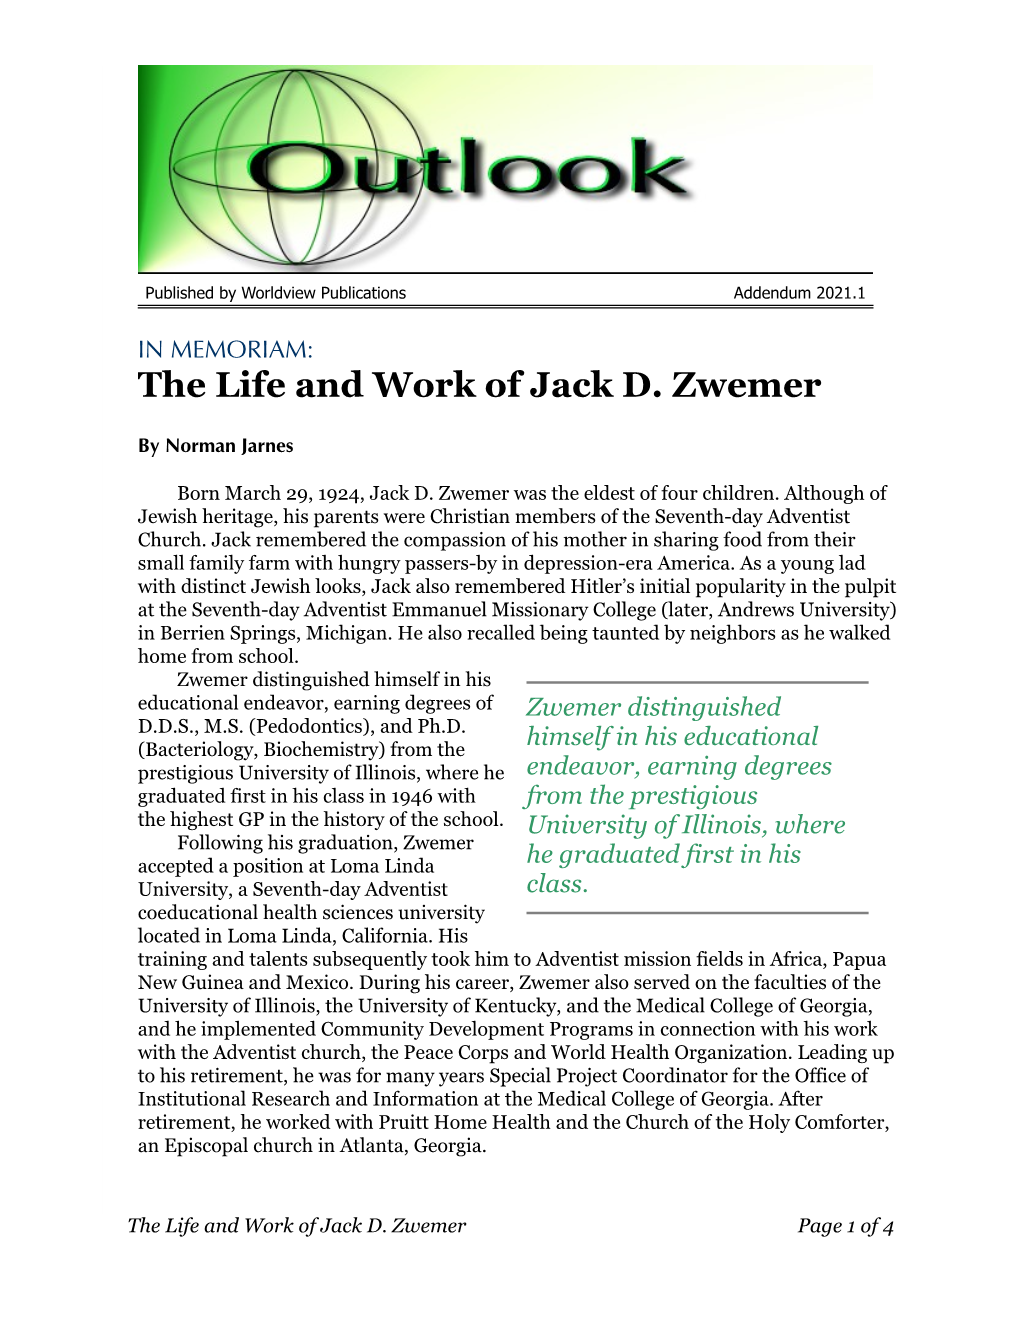 The Life and Work of Jack D. Zwemer